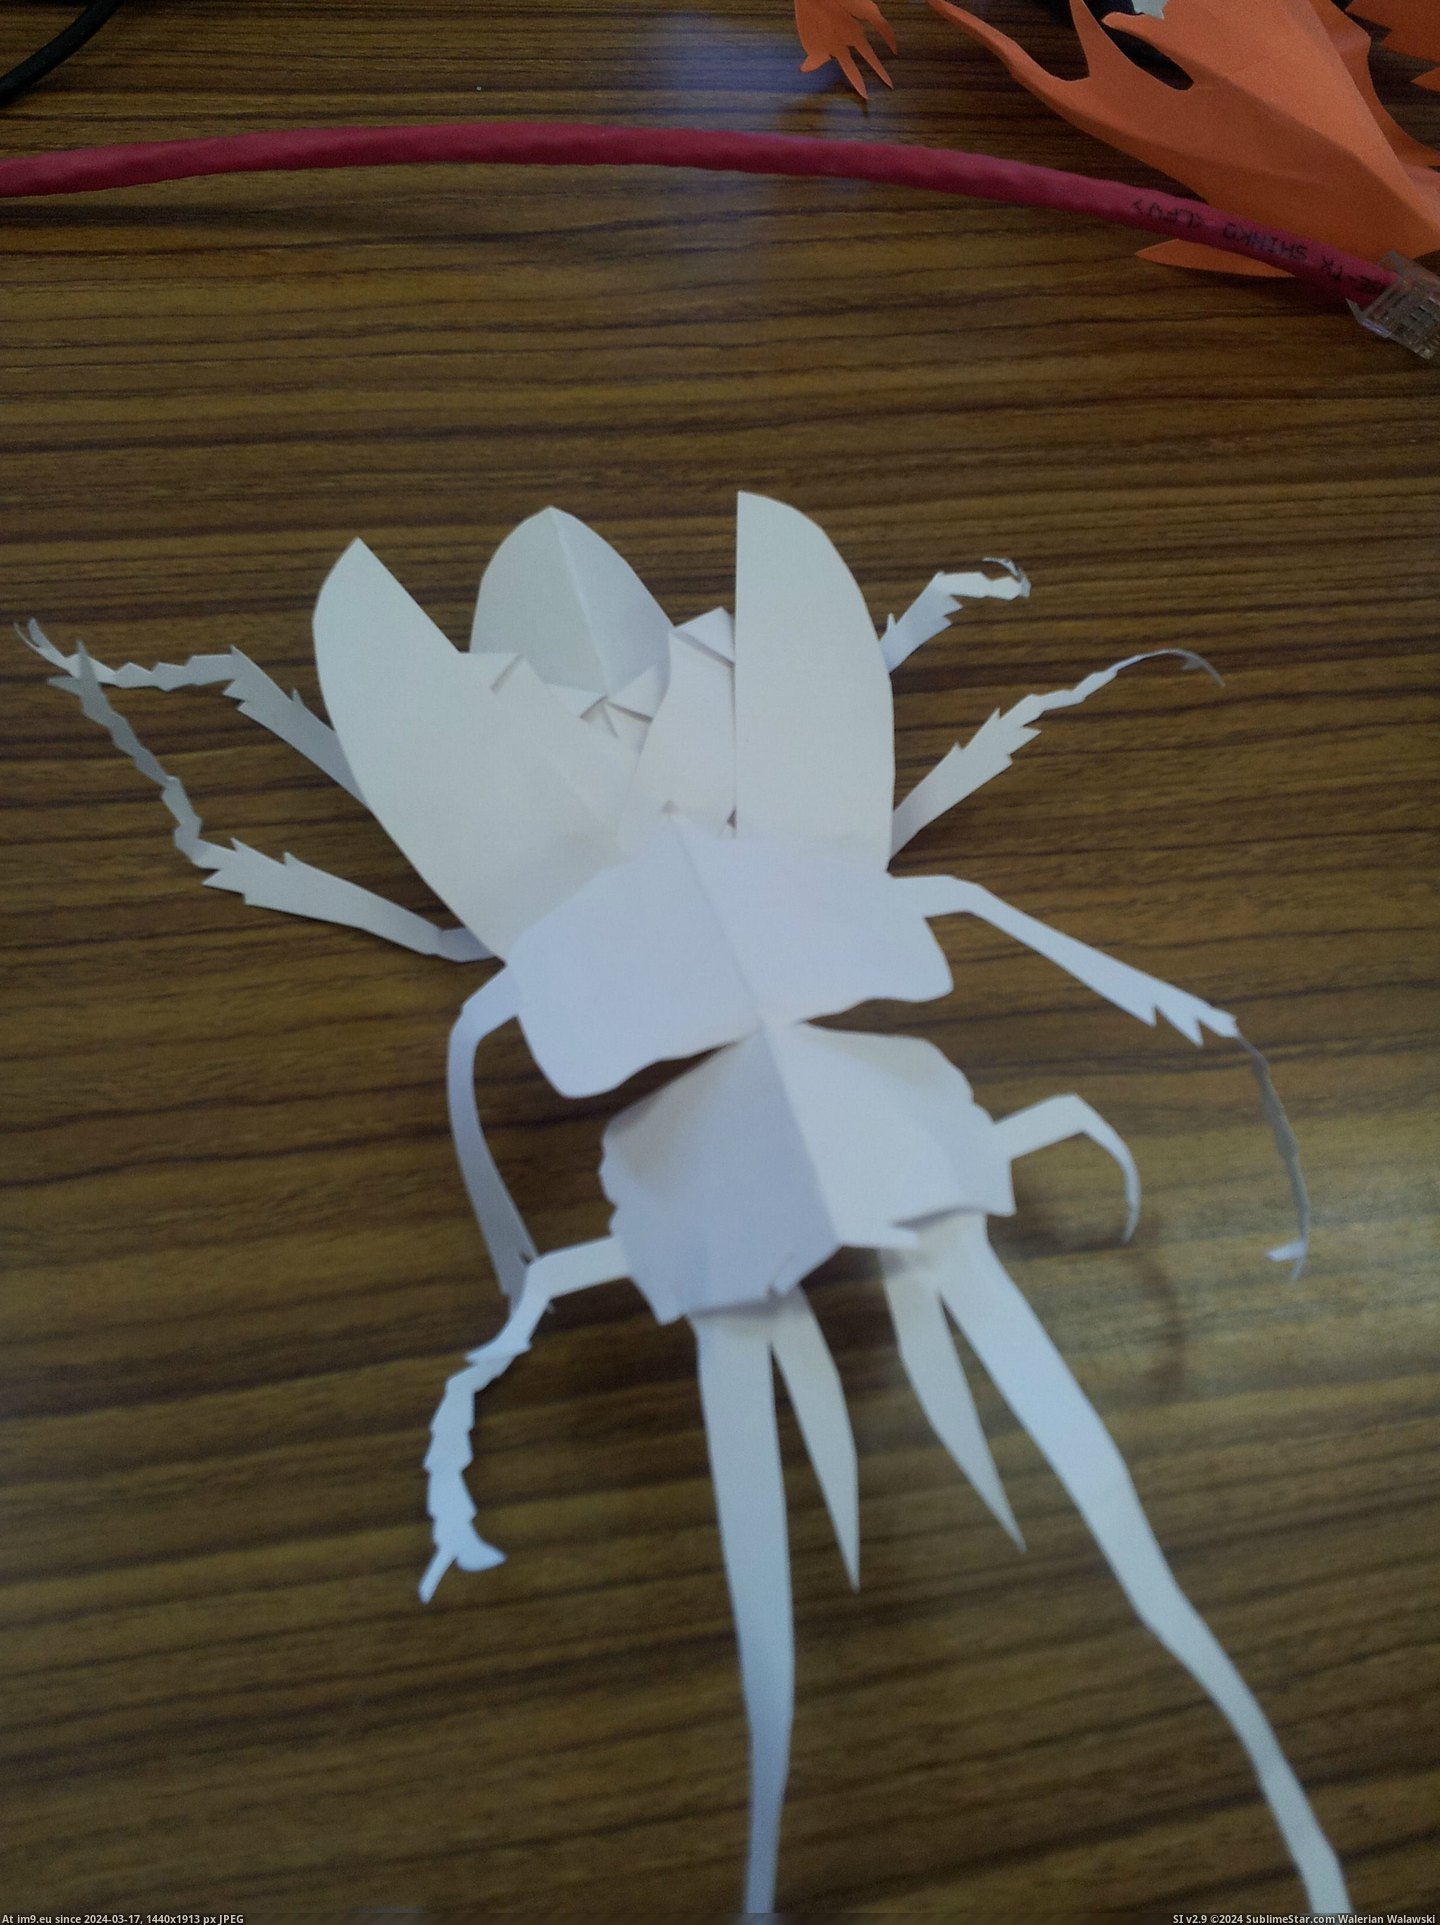 #One #Paper #Students #Creatures #Freehand #Bored #Completely [Pics] One of my students makes these creatures out of paper completely freehand whenever he is bored 9 Pic. (Изображение из альбом My r/PICS favs))